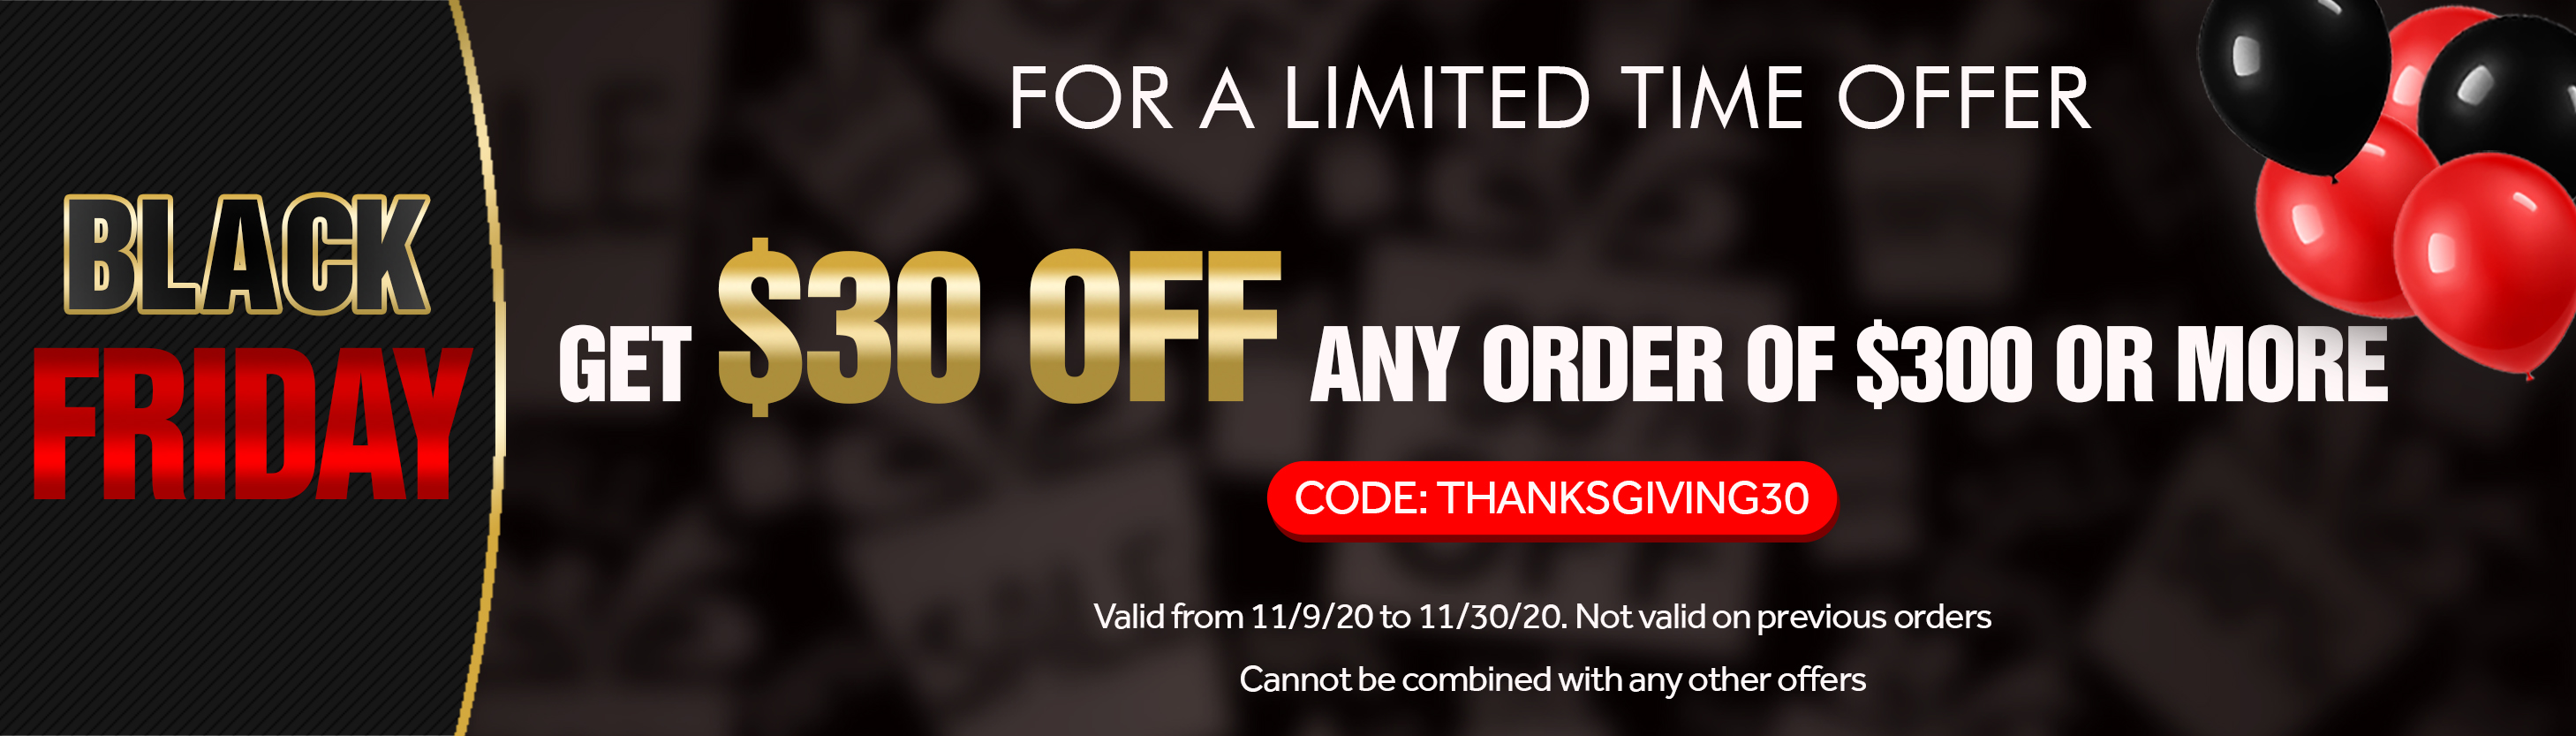 Black Friday - Get $30 off any order of $300 or more